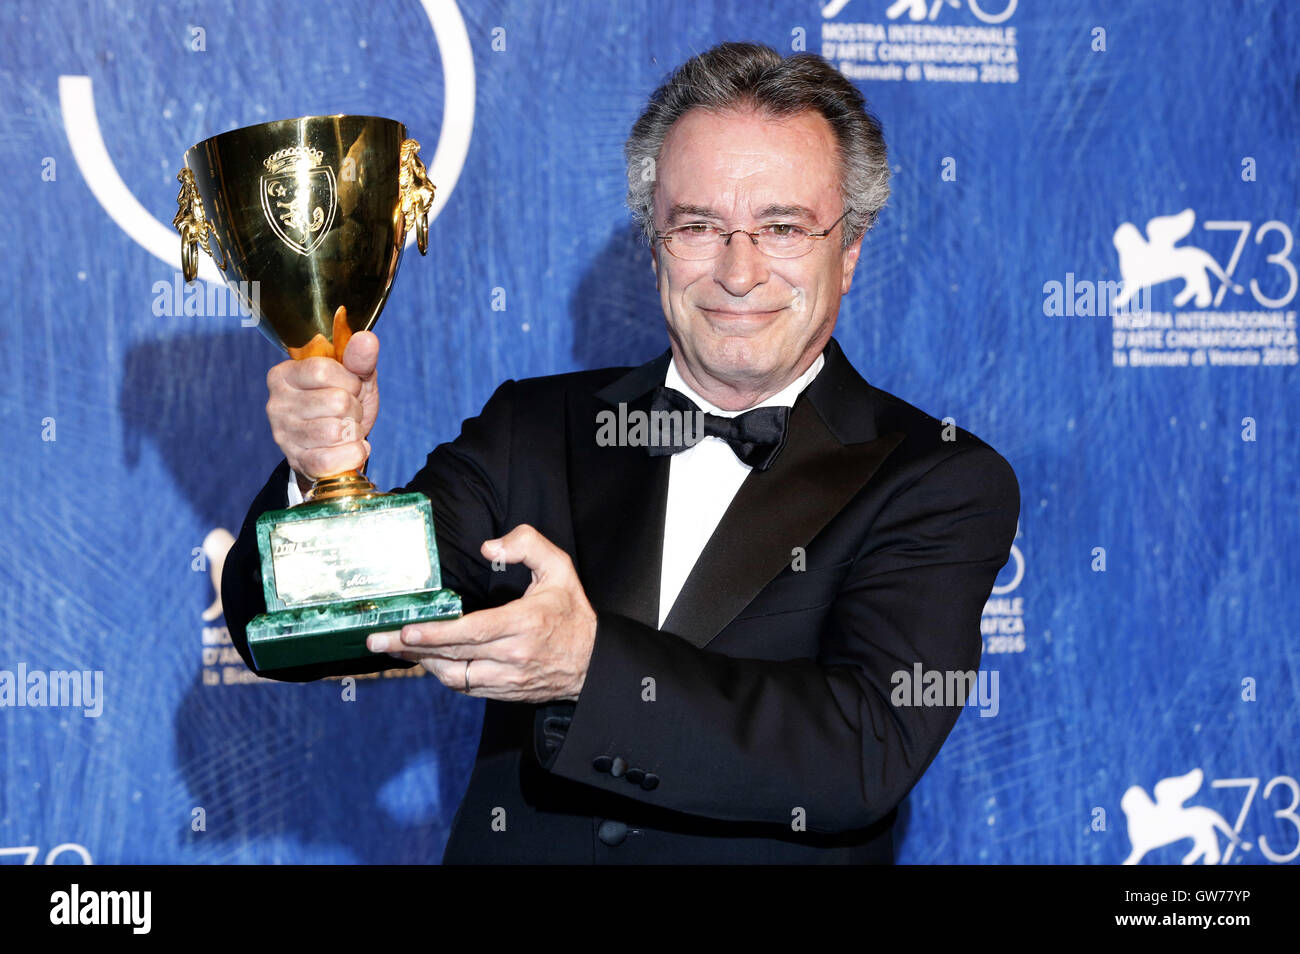 Actor Oscar Martinez wins Coppa Volpi best actor for the movie 'El Ciudadano ilustre' at the award ceremony at the 73rd Venice International Film Festival on September 10, 2016 in Venice, Italy. | Verwendung weltweit/picture alliance Stock Photo